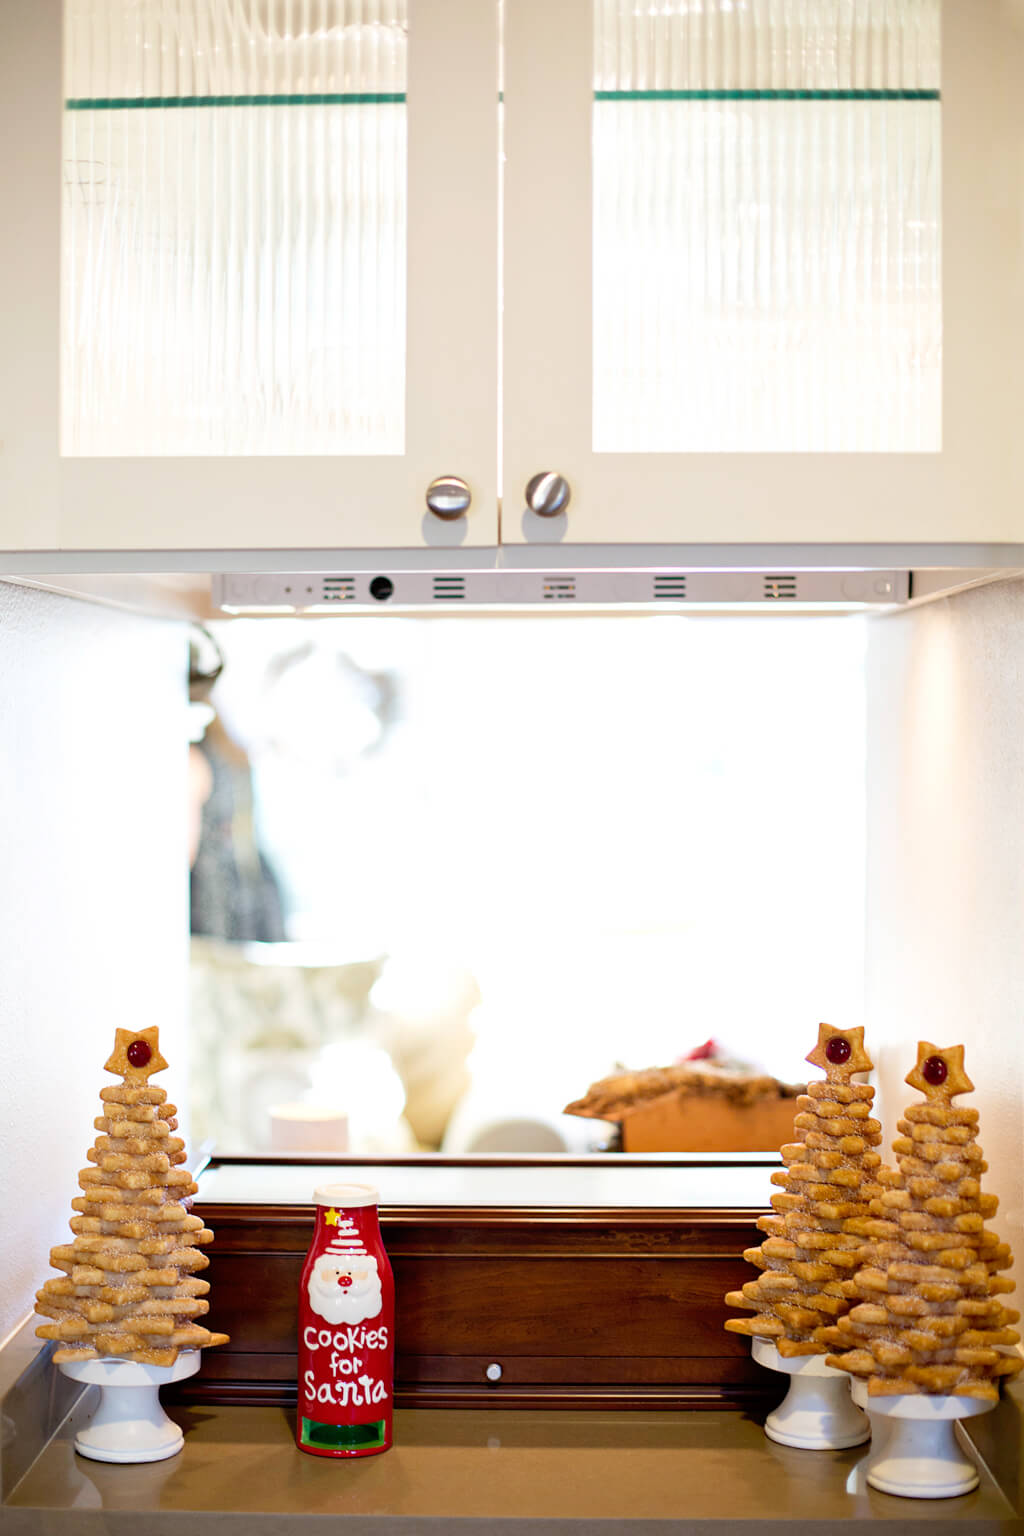 Make This Season Special // Holiday Home Tour // Christmas Decor // www.https://www.thehisfor.com